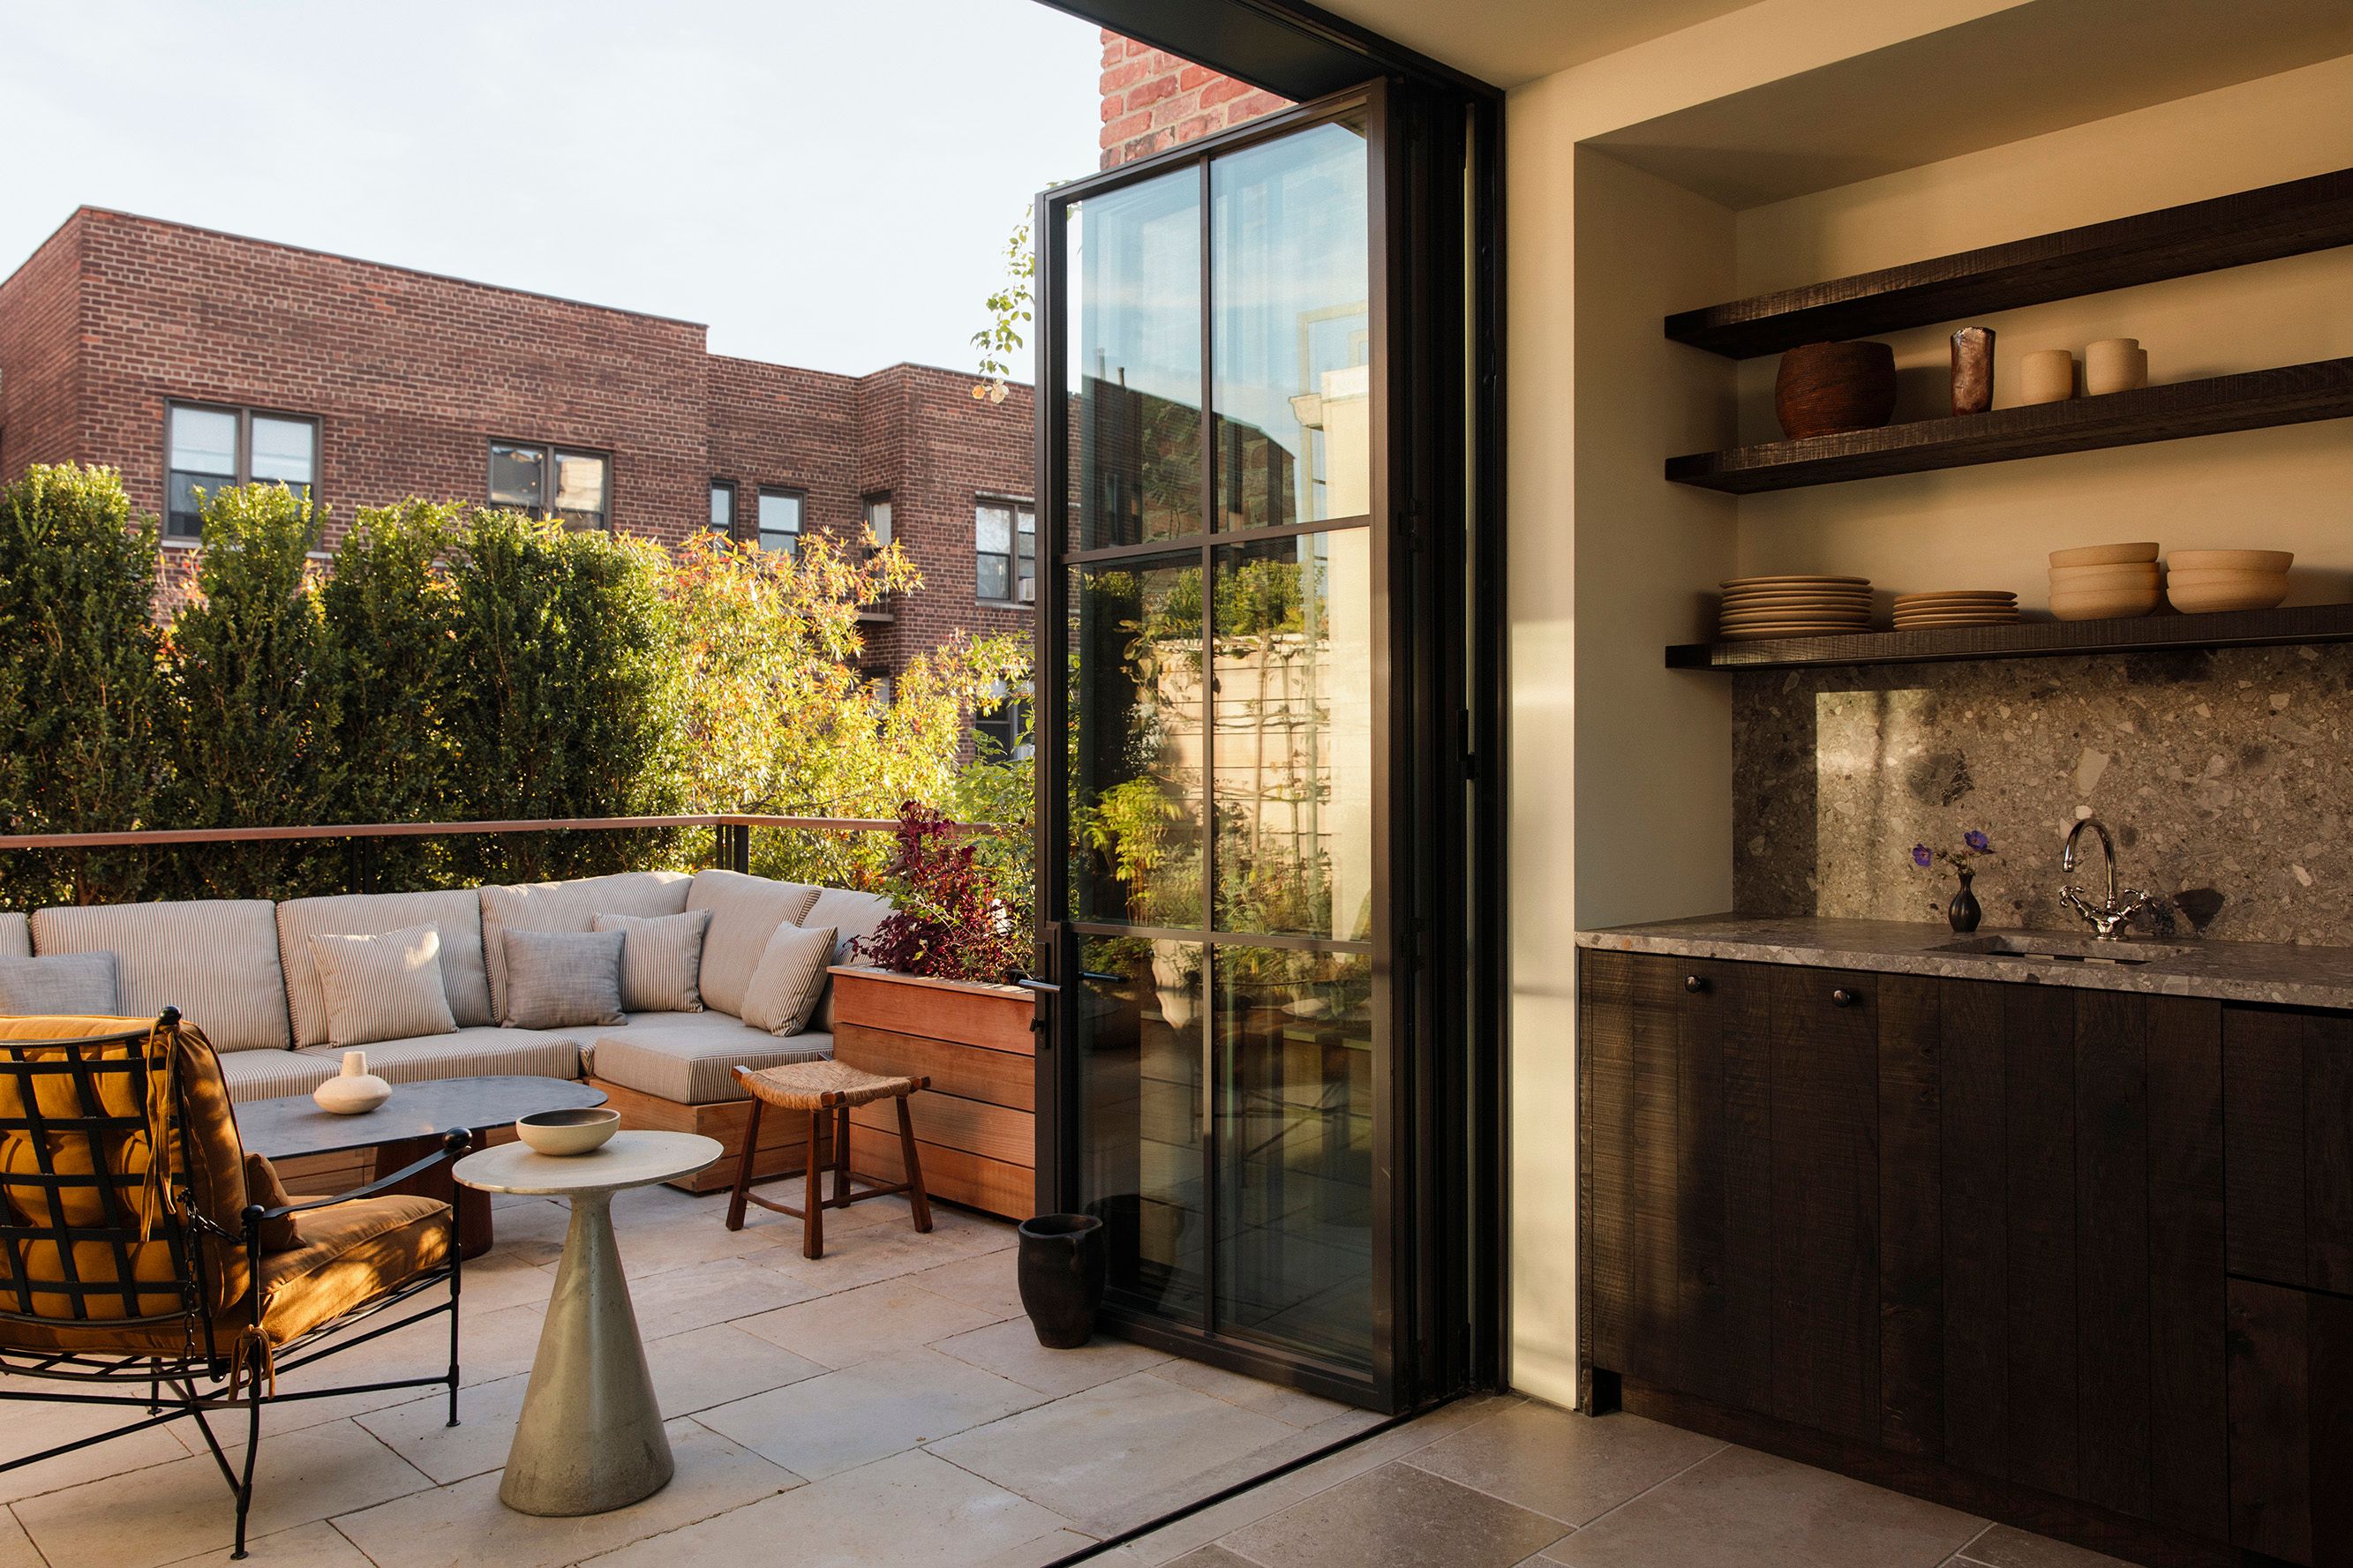 Greenwich Village Greek Revival rowhouse penthouse